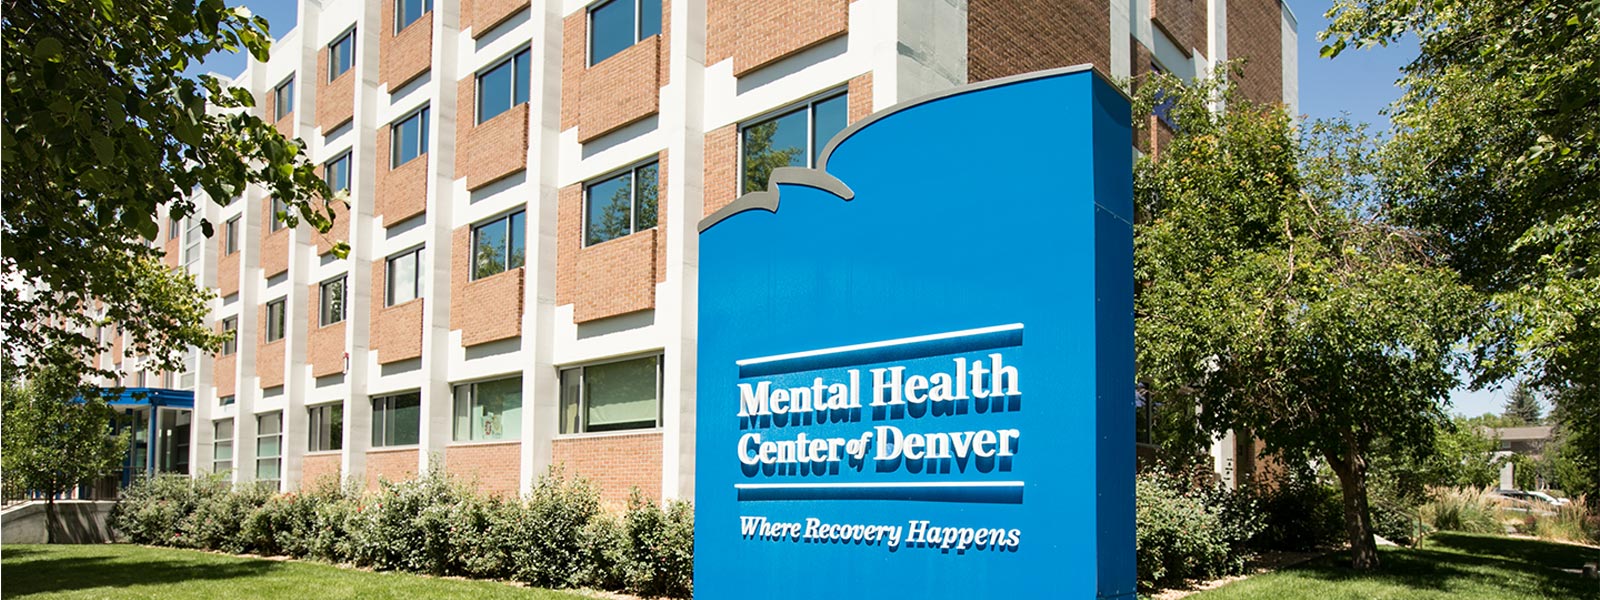 The Recovery Center is dedicated to mental and physical healing. Our state-of-the-art facility expands access to services and streamlines the way services are delivered.